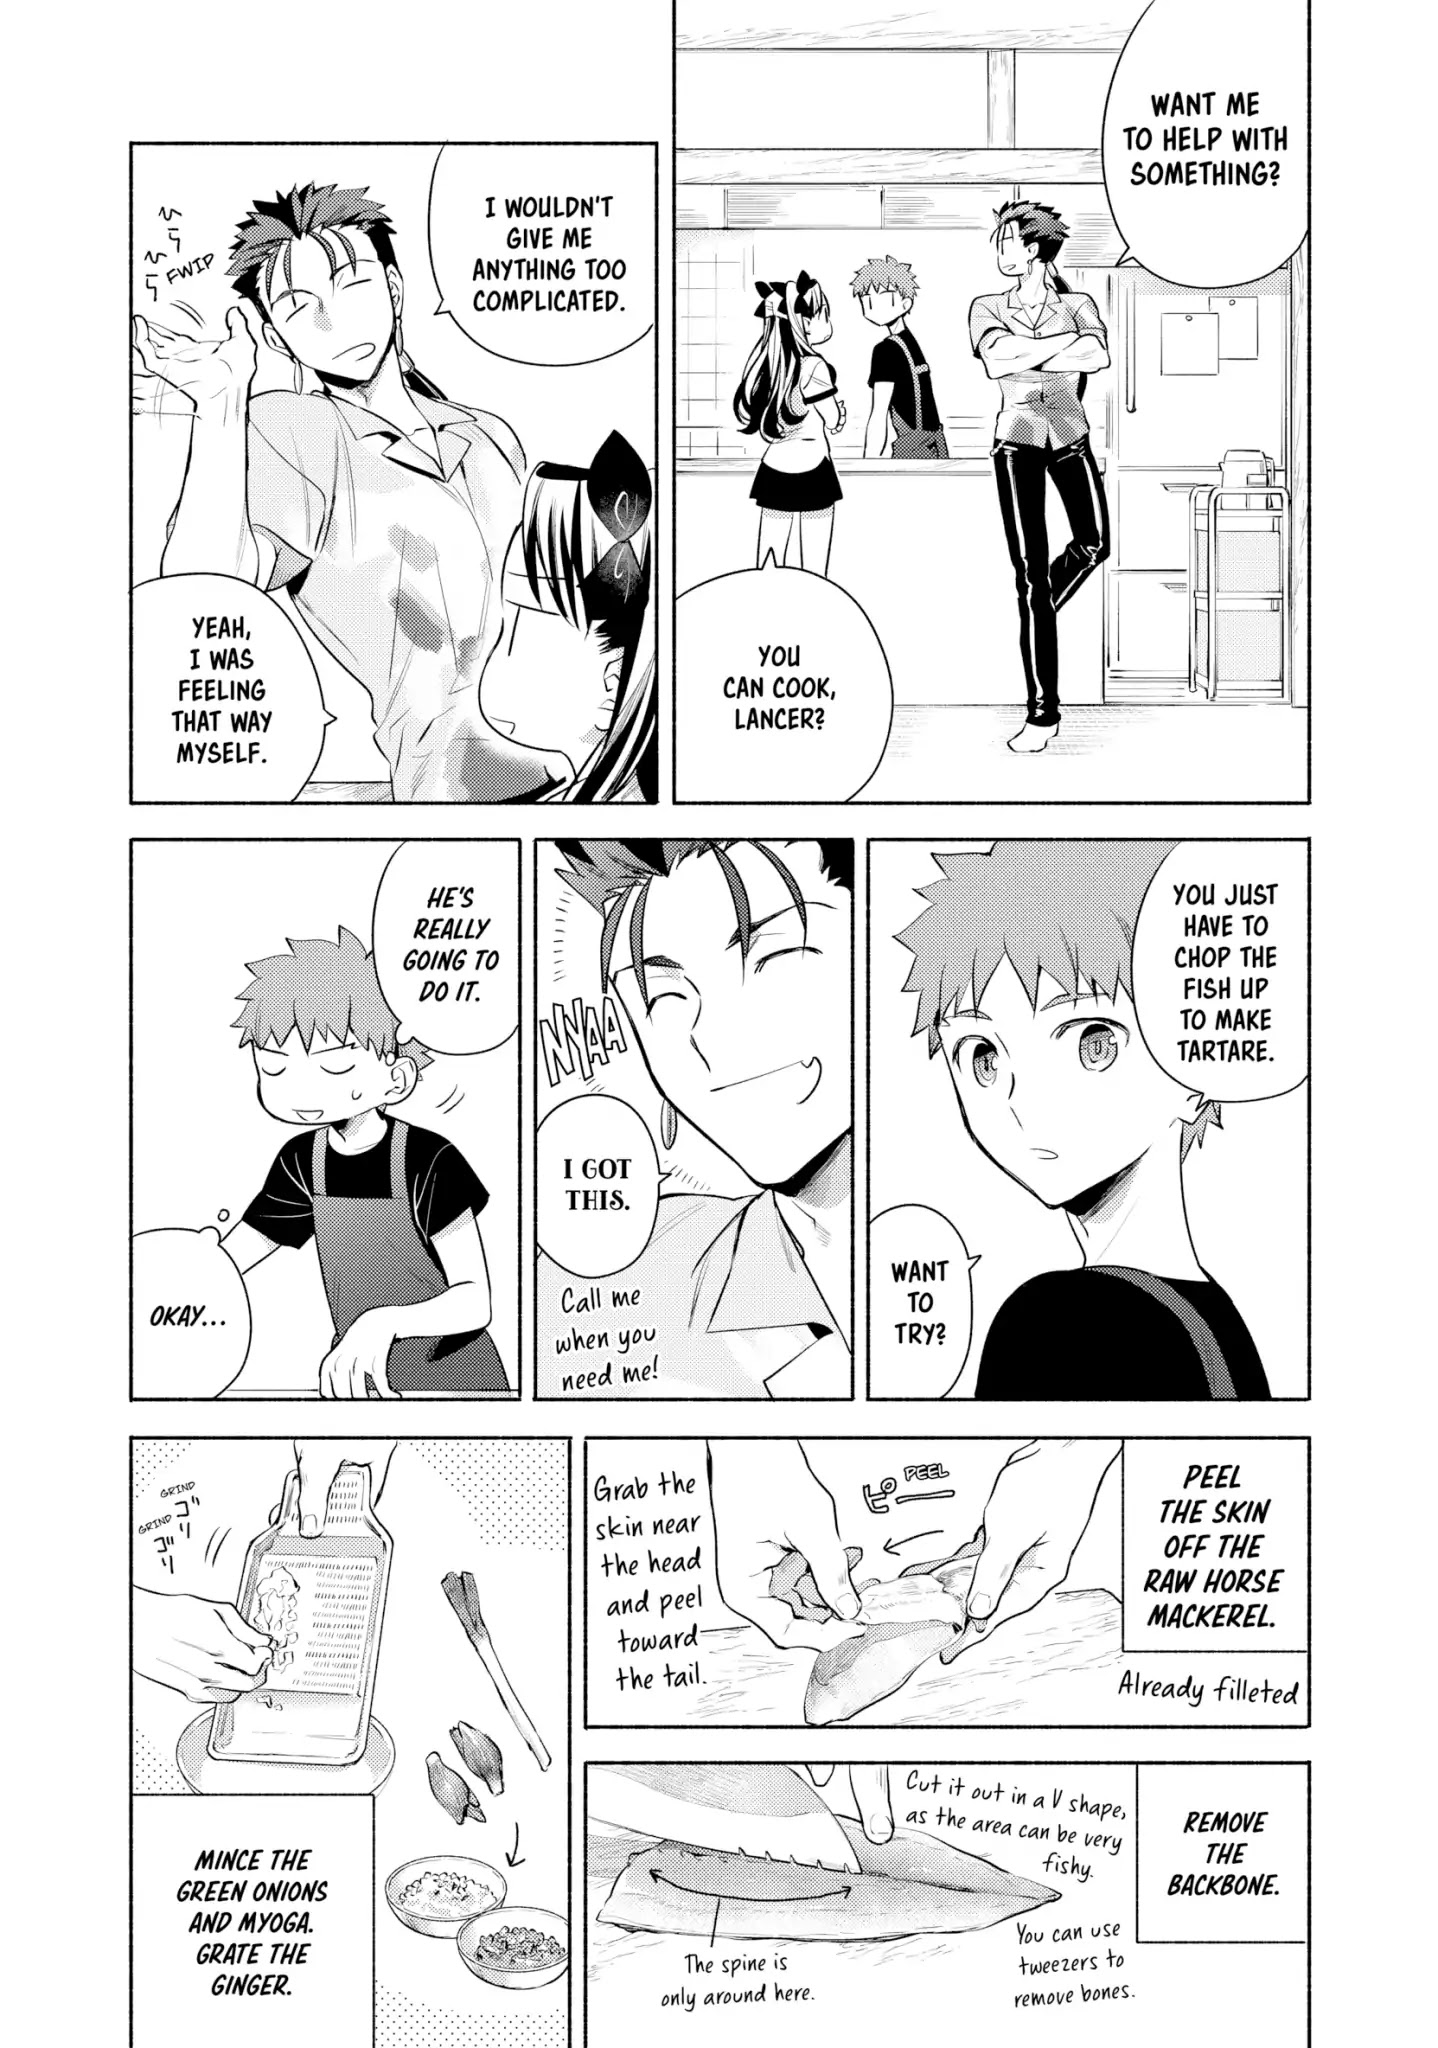 What's Cooking at the Emiya House Today? Chapter 14: A Horse Mackeral Feast